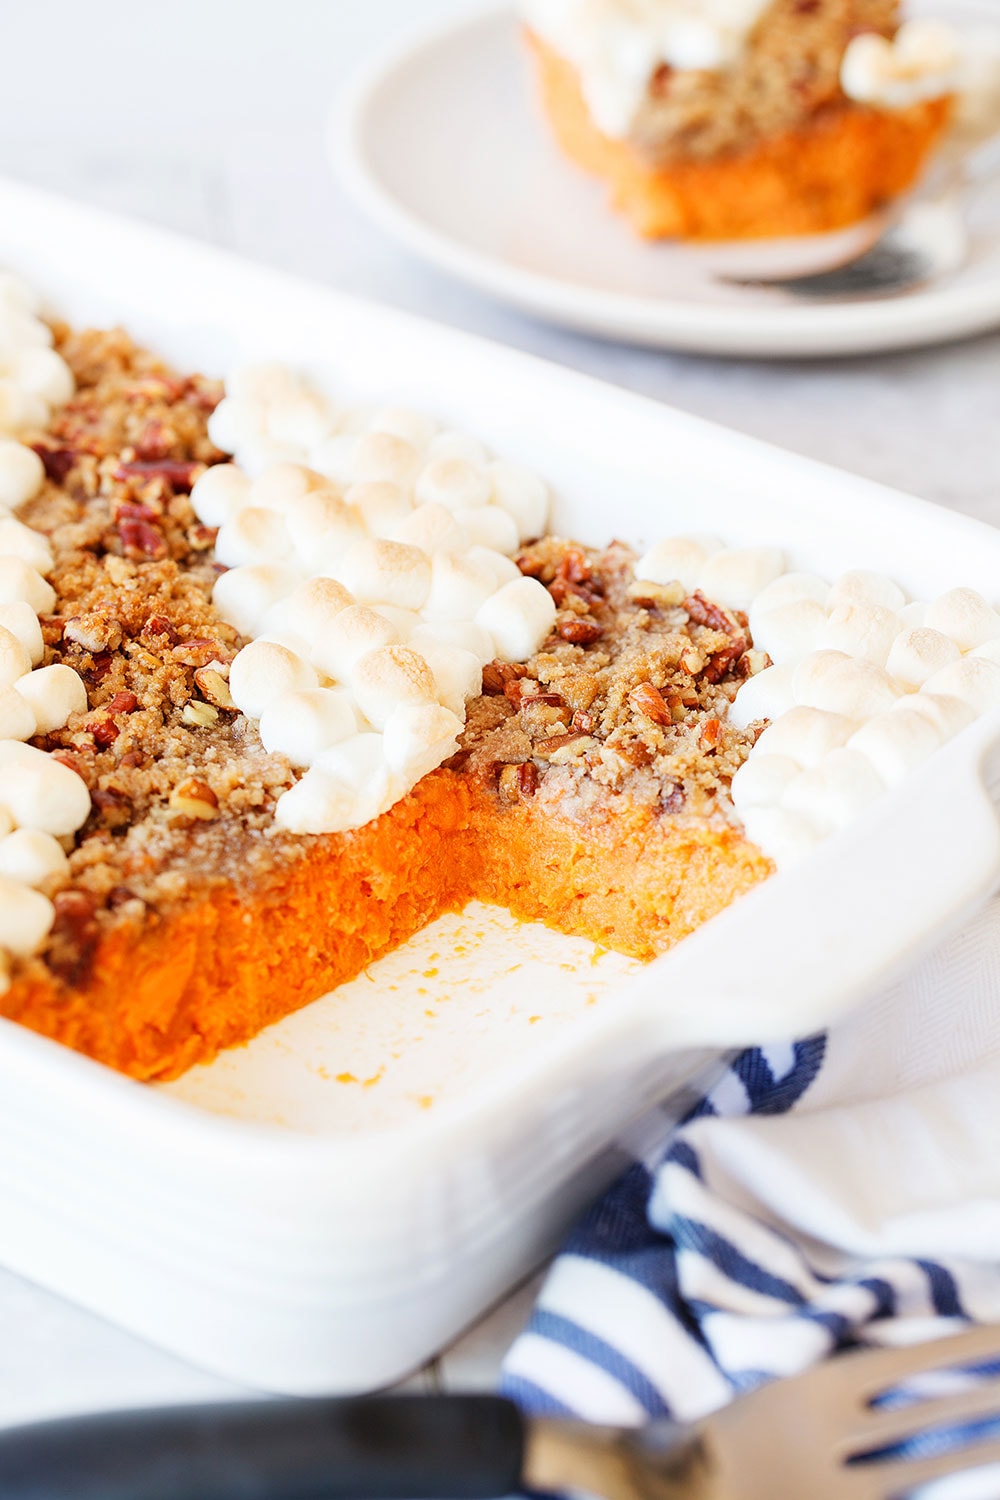 This crowd-pleasing sweet potato casserole has both a pecan topping and a marshmallow topping for the best of both worlds!